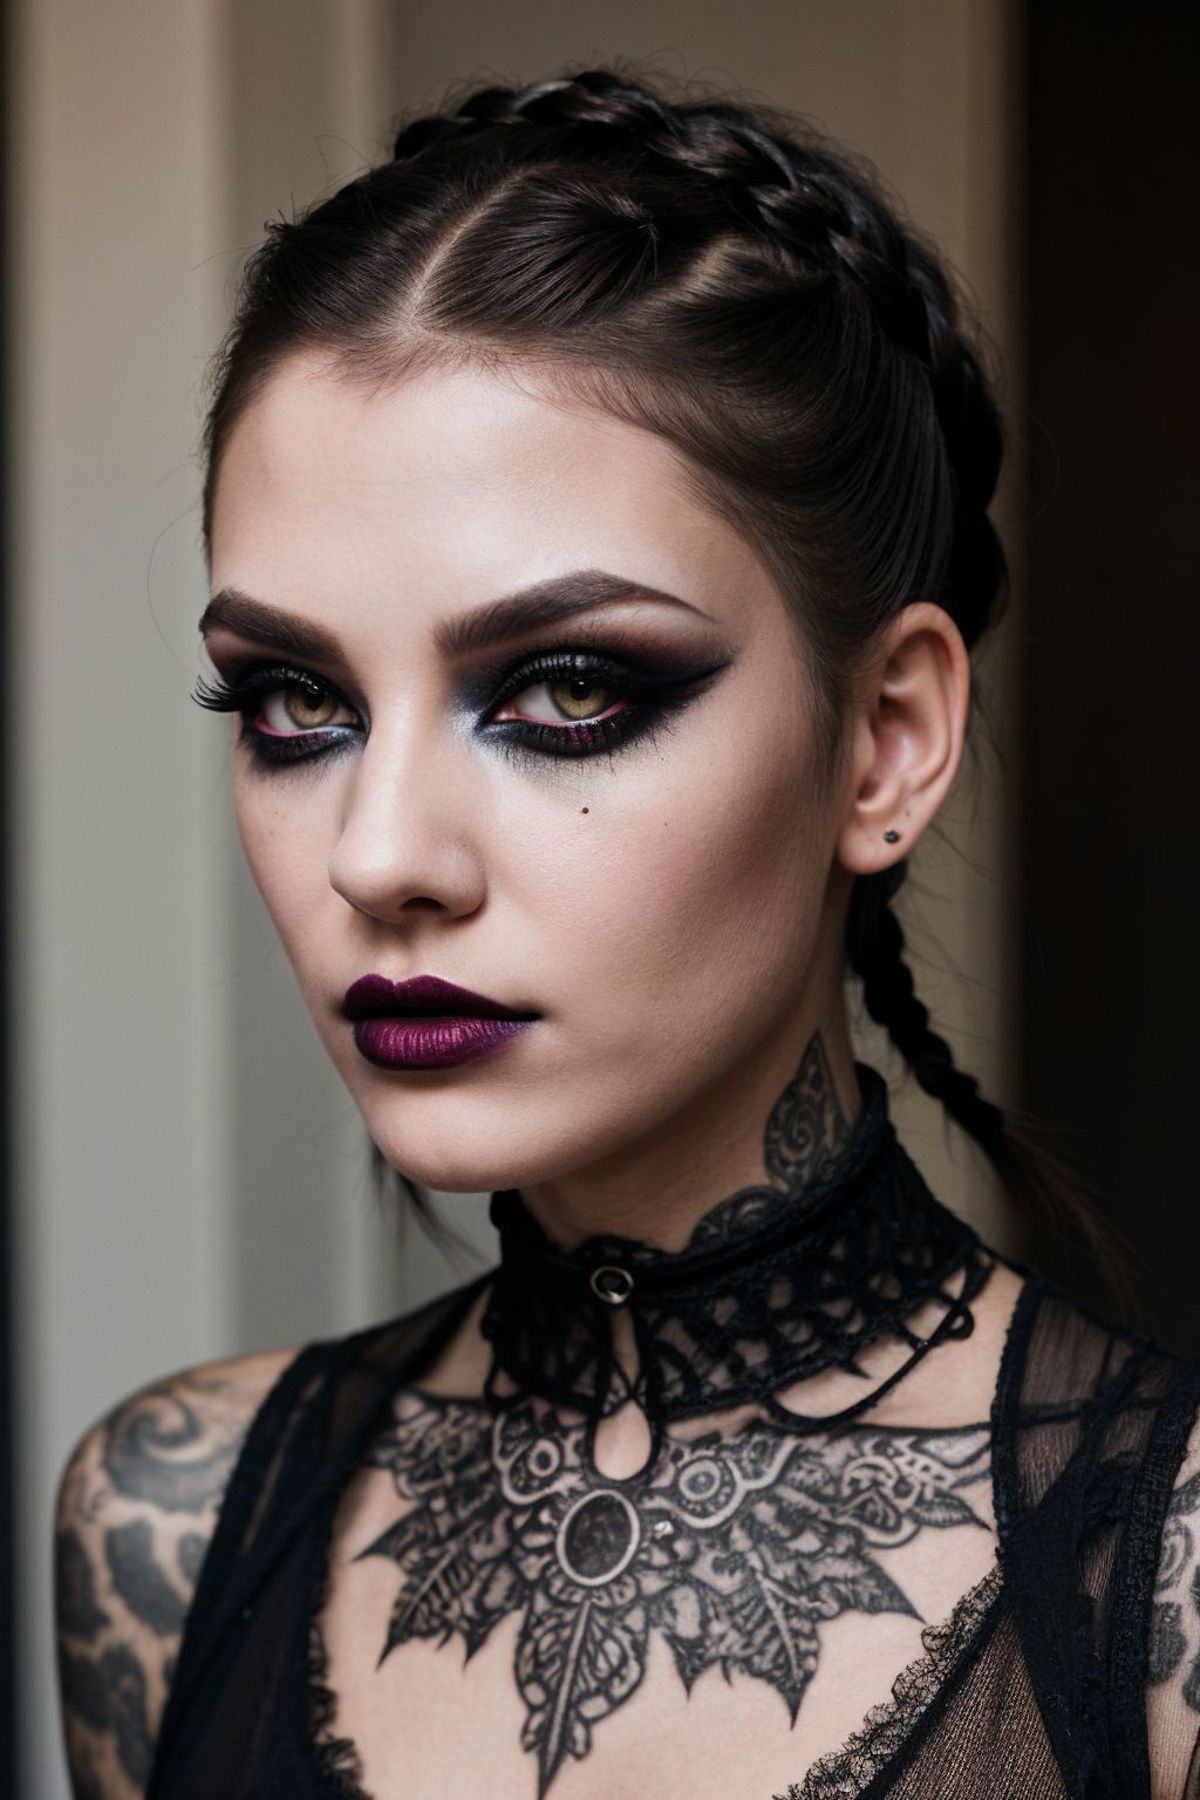 A woman with purple lipstick, tattoos, and a black top.